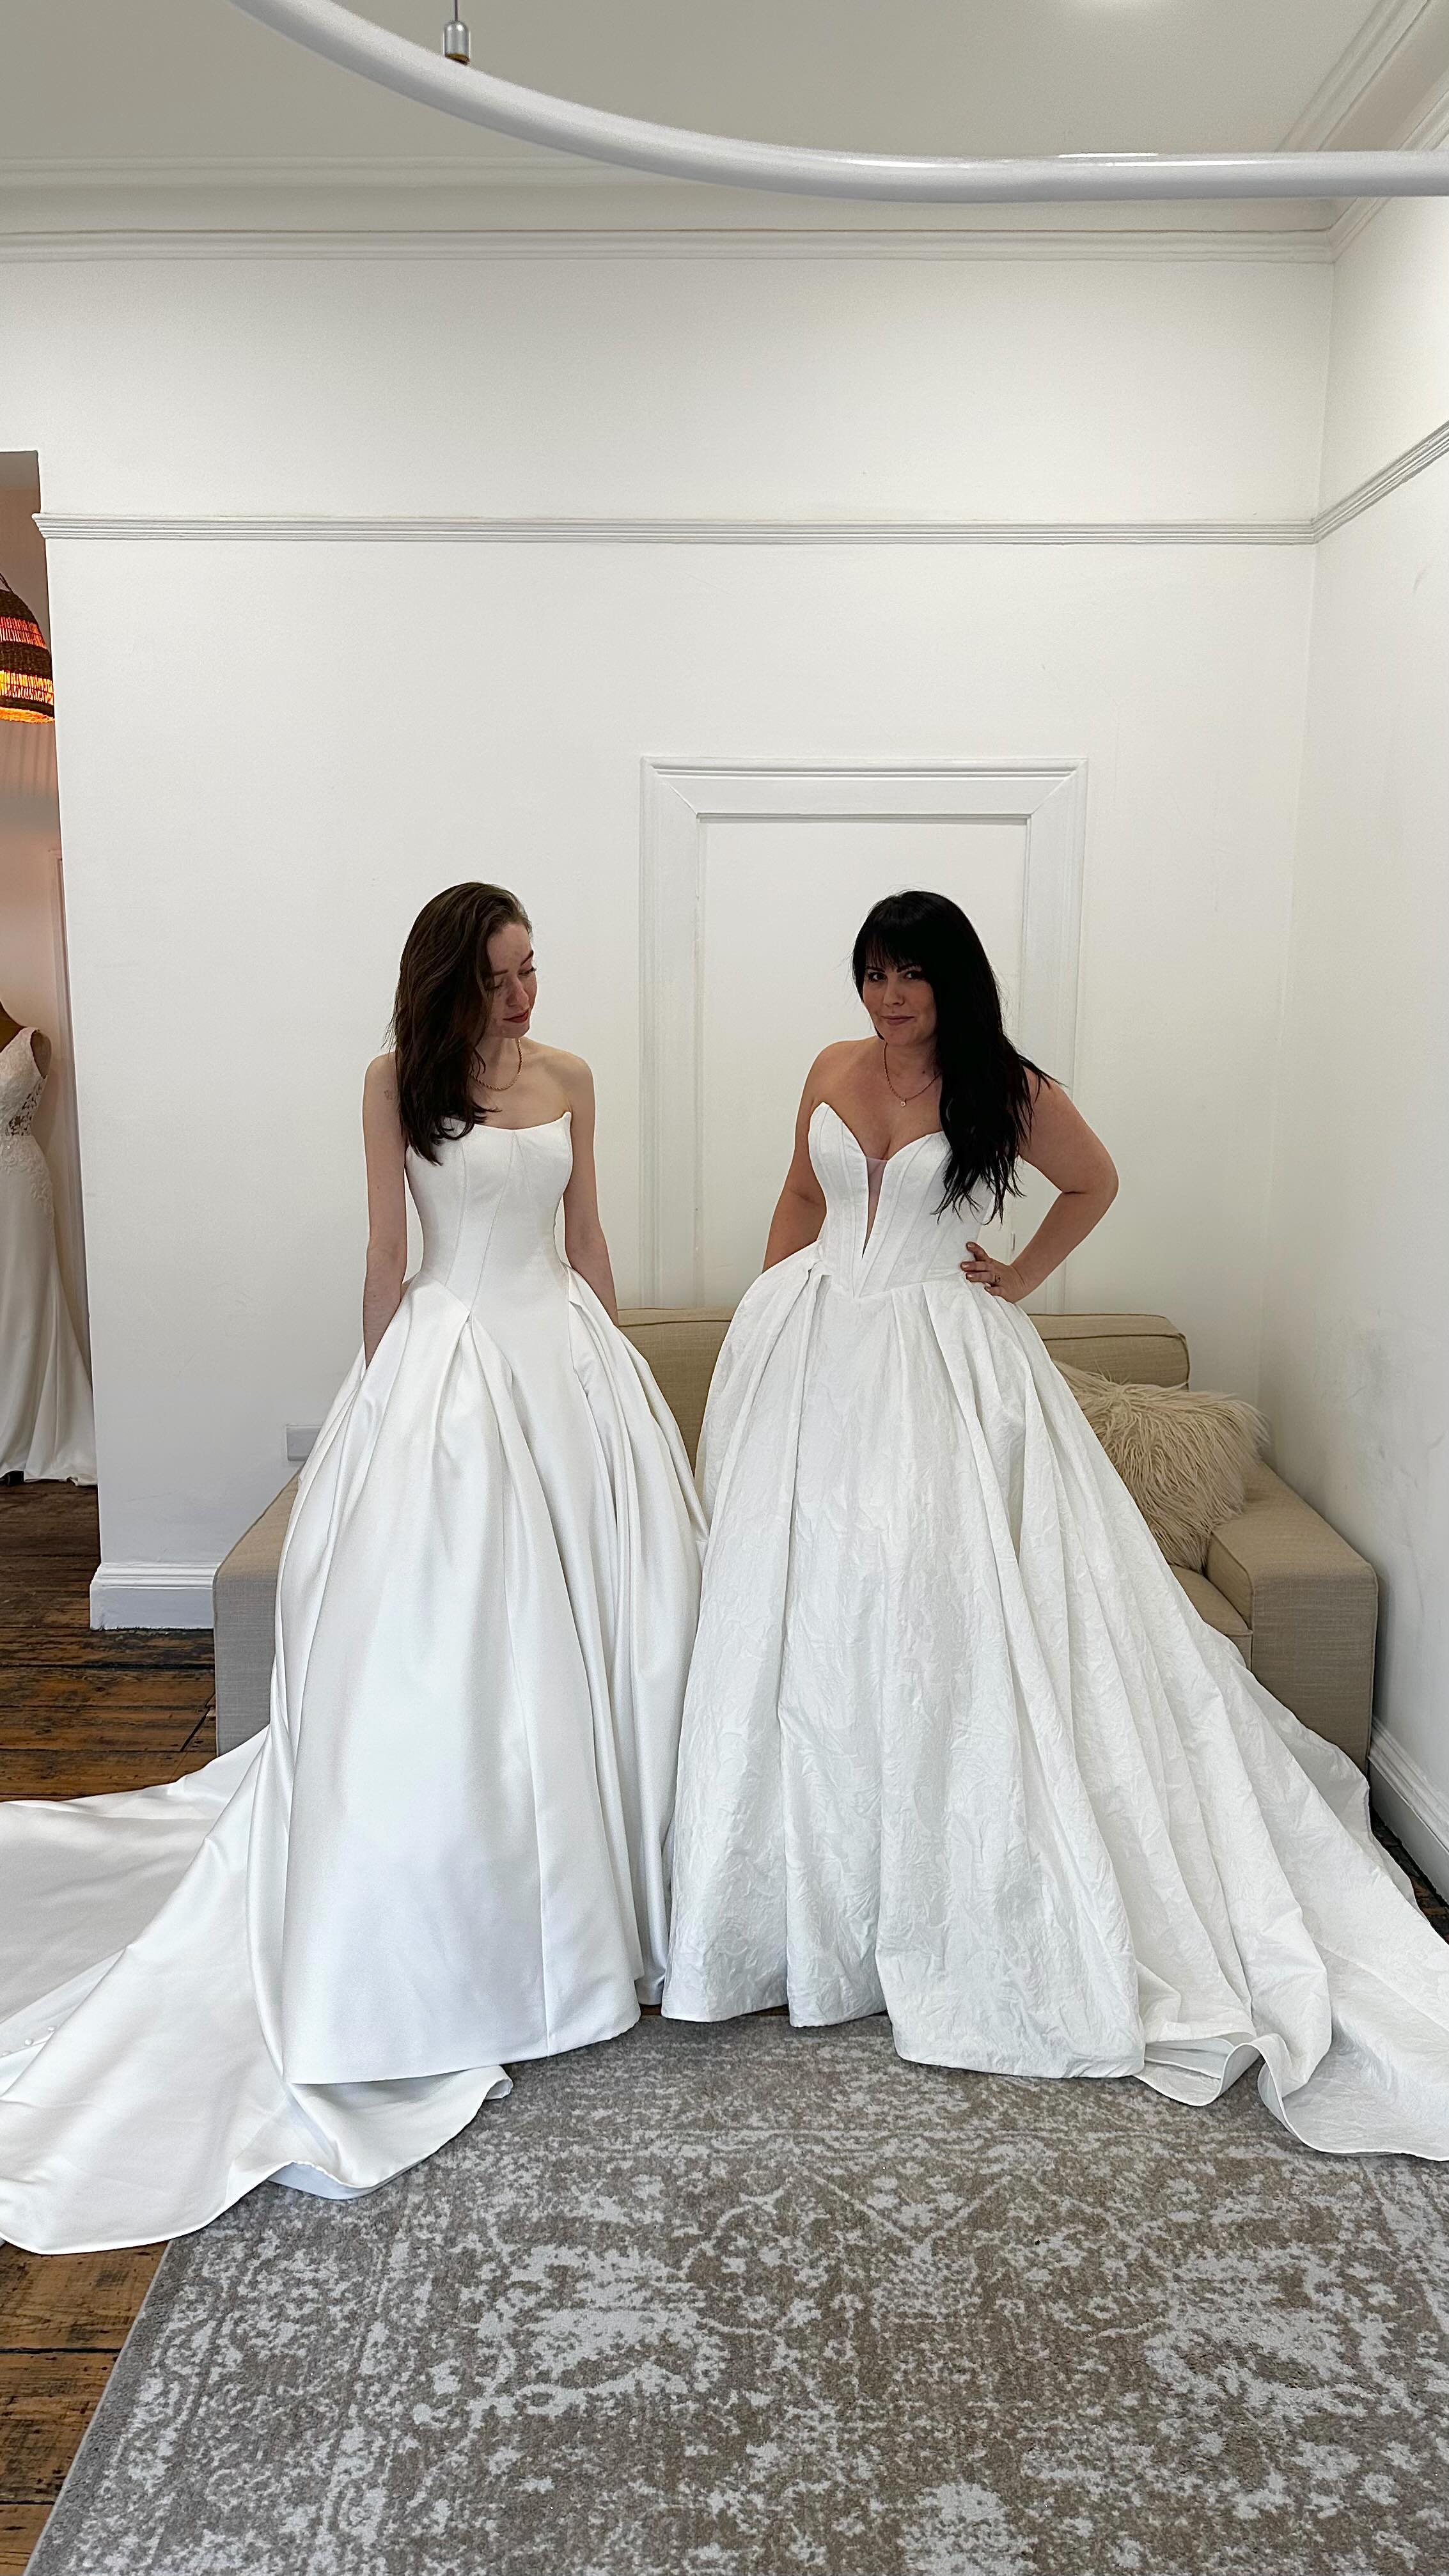 Come & setup our @maggiesotterodesigns PREVIEW TRUNK SHOW gowns angels ◊ Here this week only - be the first in the UK to try on & order your dream dress angels before these styles hit the boutiques at the end of this summer ◊ All the hottest trends from the catwalks are here for 2 more days only … we have special availability this Saturday for you to see next years styles PLUS receive an incredible 10% off your dream dress from the trunk show ◊We’re so excited to find the one with you babe ◊#youarepreciousbridal #maggiesottero #rebeccaingram # maggiesotterodesigns #maggiesotterotrunkshow #bridaltrunkshow #weddingdresstrunkshow #bridalpreview #dreamweddingdress #weddingdressinspo #newcastleupontyne #bridalboutiquenewcastle